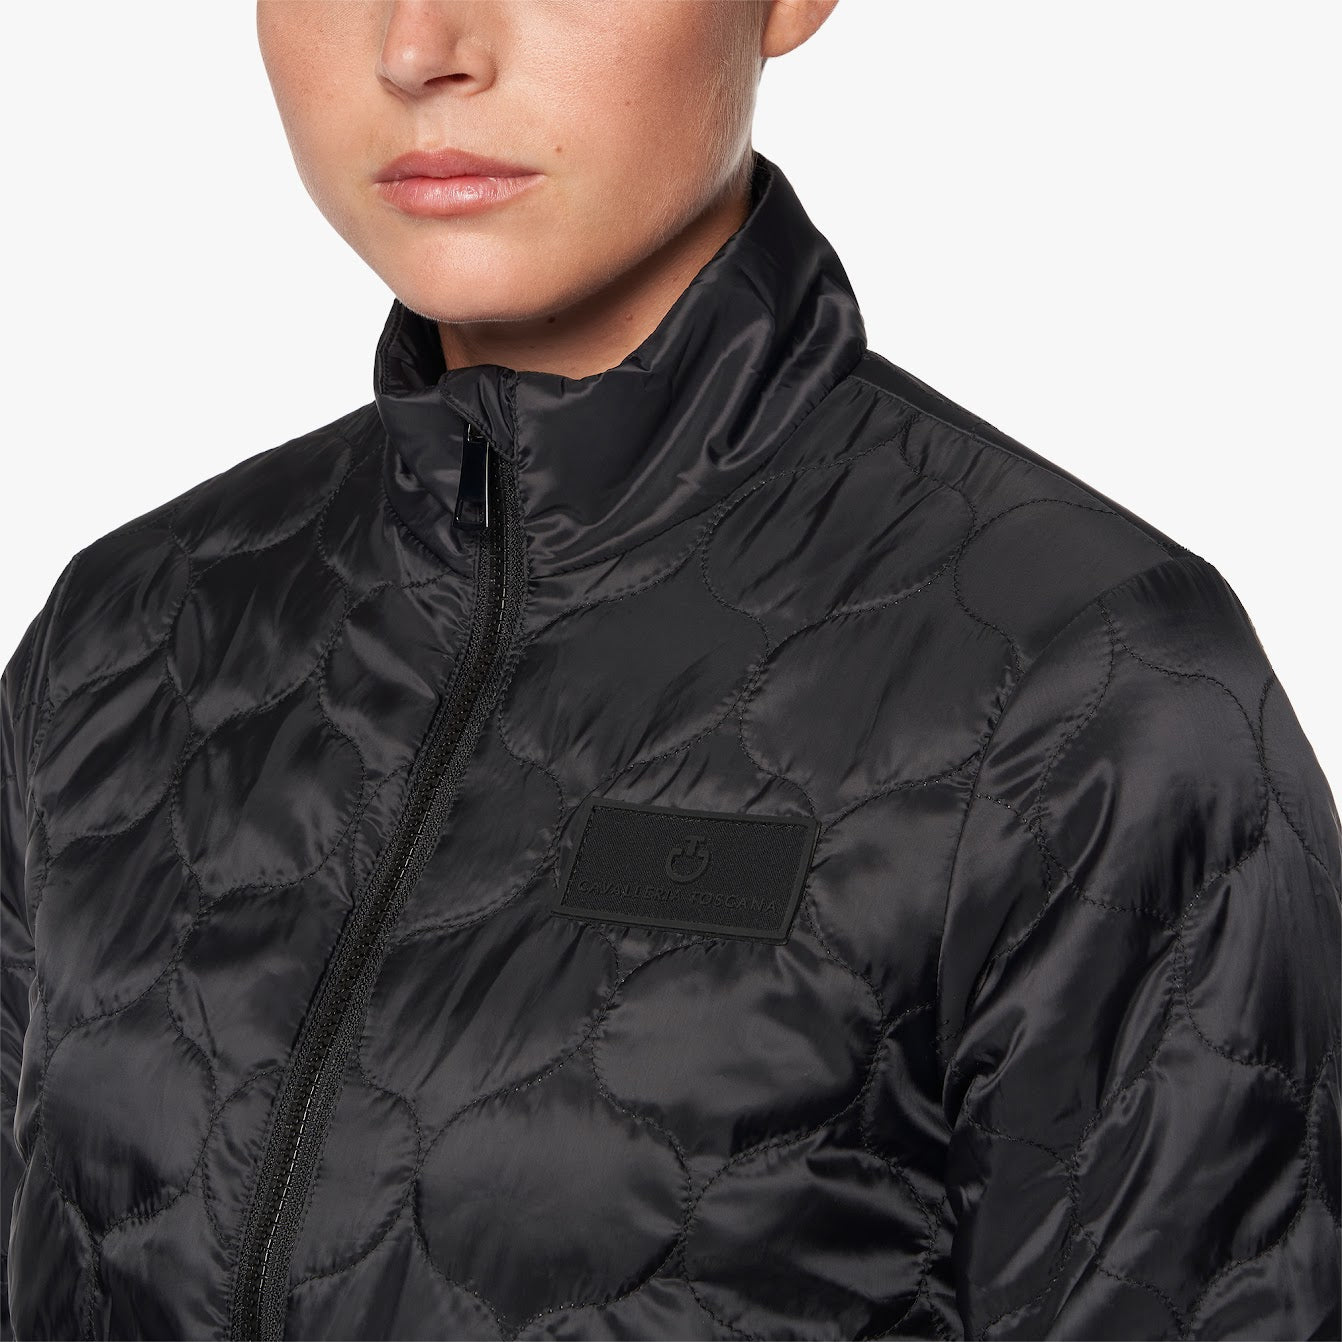 The Cavalleria Toscana Revo 3 way Waterproof Jacket with detachable puffer is the only coat you need this season. Perfect for our ever changing weather. The outer is fully waterproof and the inner puffer coat seamlessly zips inside, giving you three jackets in one. This versatile CT Revolution jacket has stylish gold accents that compliment the CT Revolution collection. It’s technical features are designed for the rider with side sips ensuring maximum comfort and movement. 